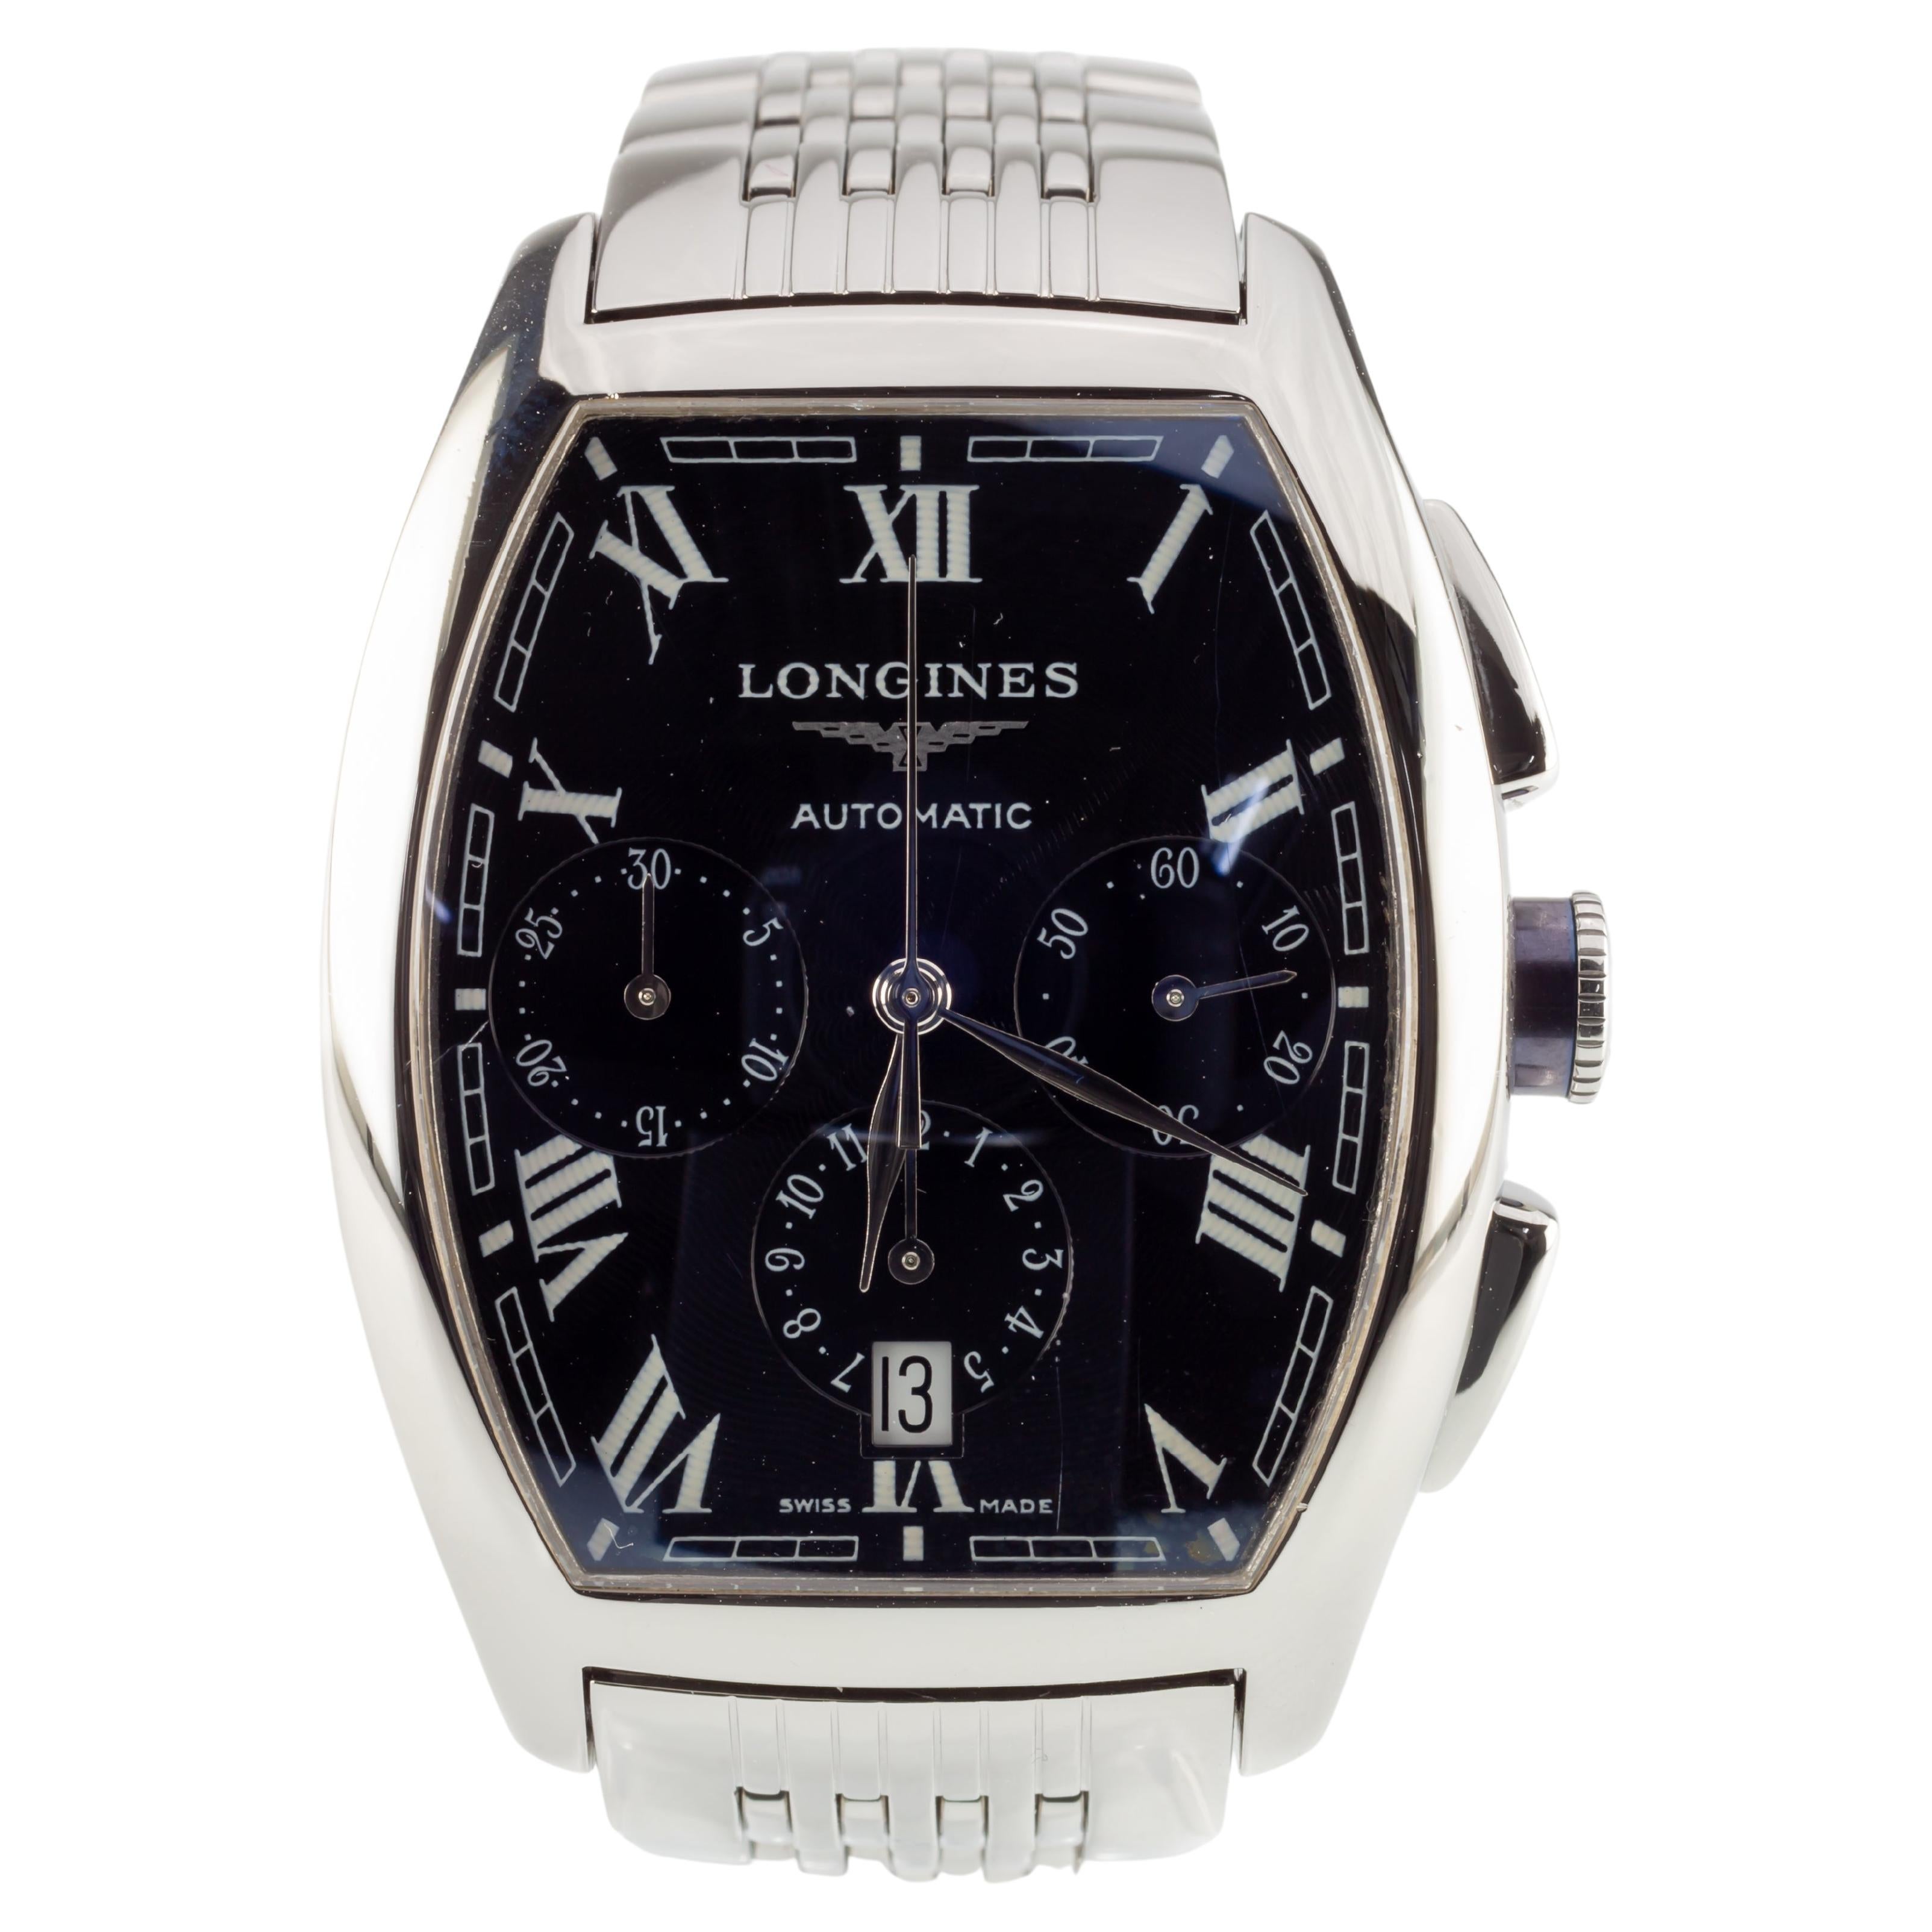 Longines Evidenza Men's Automatic Chronograph Watch w/ Box and Papers L2.643.4 For Sale